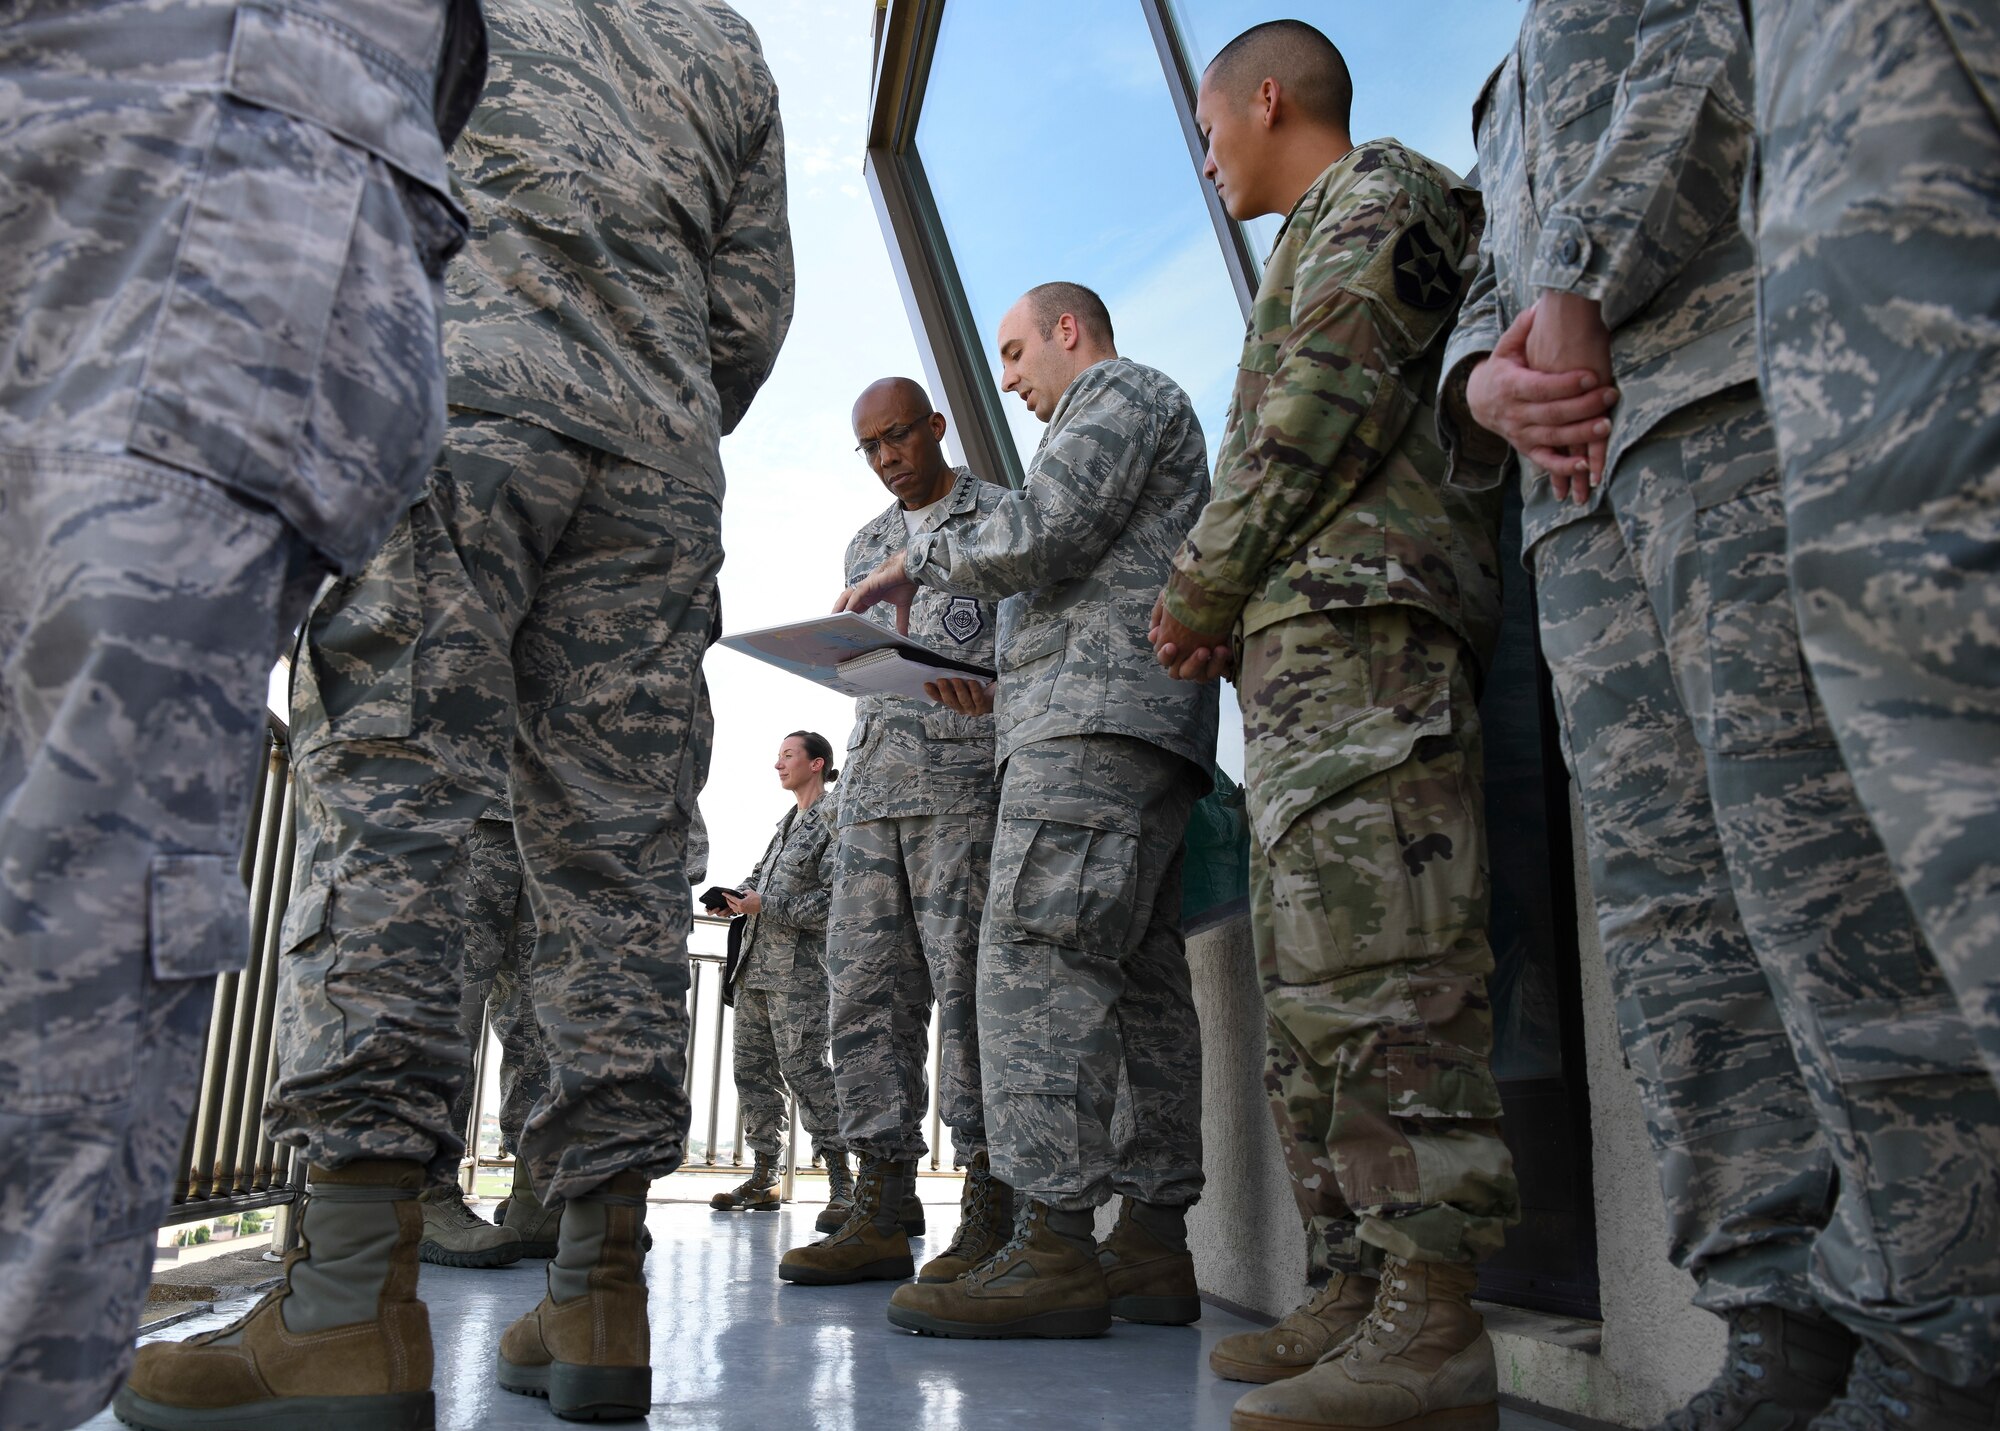 U.S. Air Force Capt. Shaun Hyland-Moore (center), 8th Civil Engineer Squadron engineering flight commander, briefs Gen. CQ Brown, Jr., Pacific Air Forces commander (left), during his immersion tour at Kunsan Air Base, Republic of Korea, Aug. 29, 2018. Airmen from the 8th Fighter Wing briefed Brown on current airfield construction, hazardous material construction, and Department of Defense explosives safety board responsibilities and procedures, while overlooking the installation from the air traffic control tower. (U.S. Air Force photo by Senior Airman Savannah L. Waters)